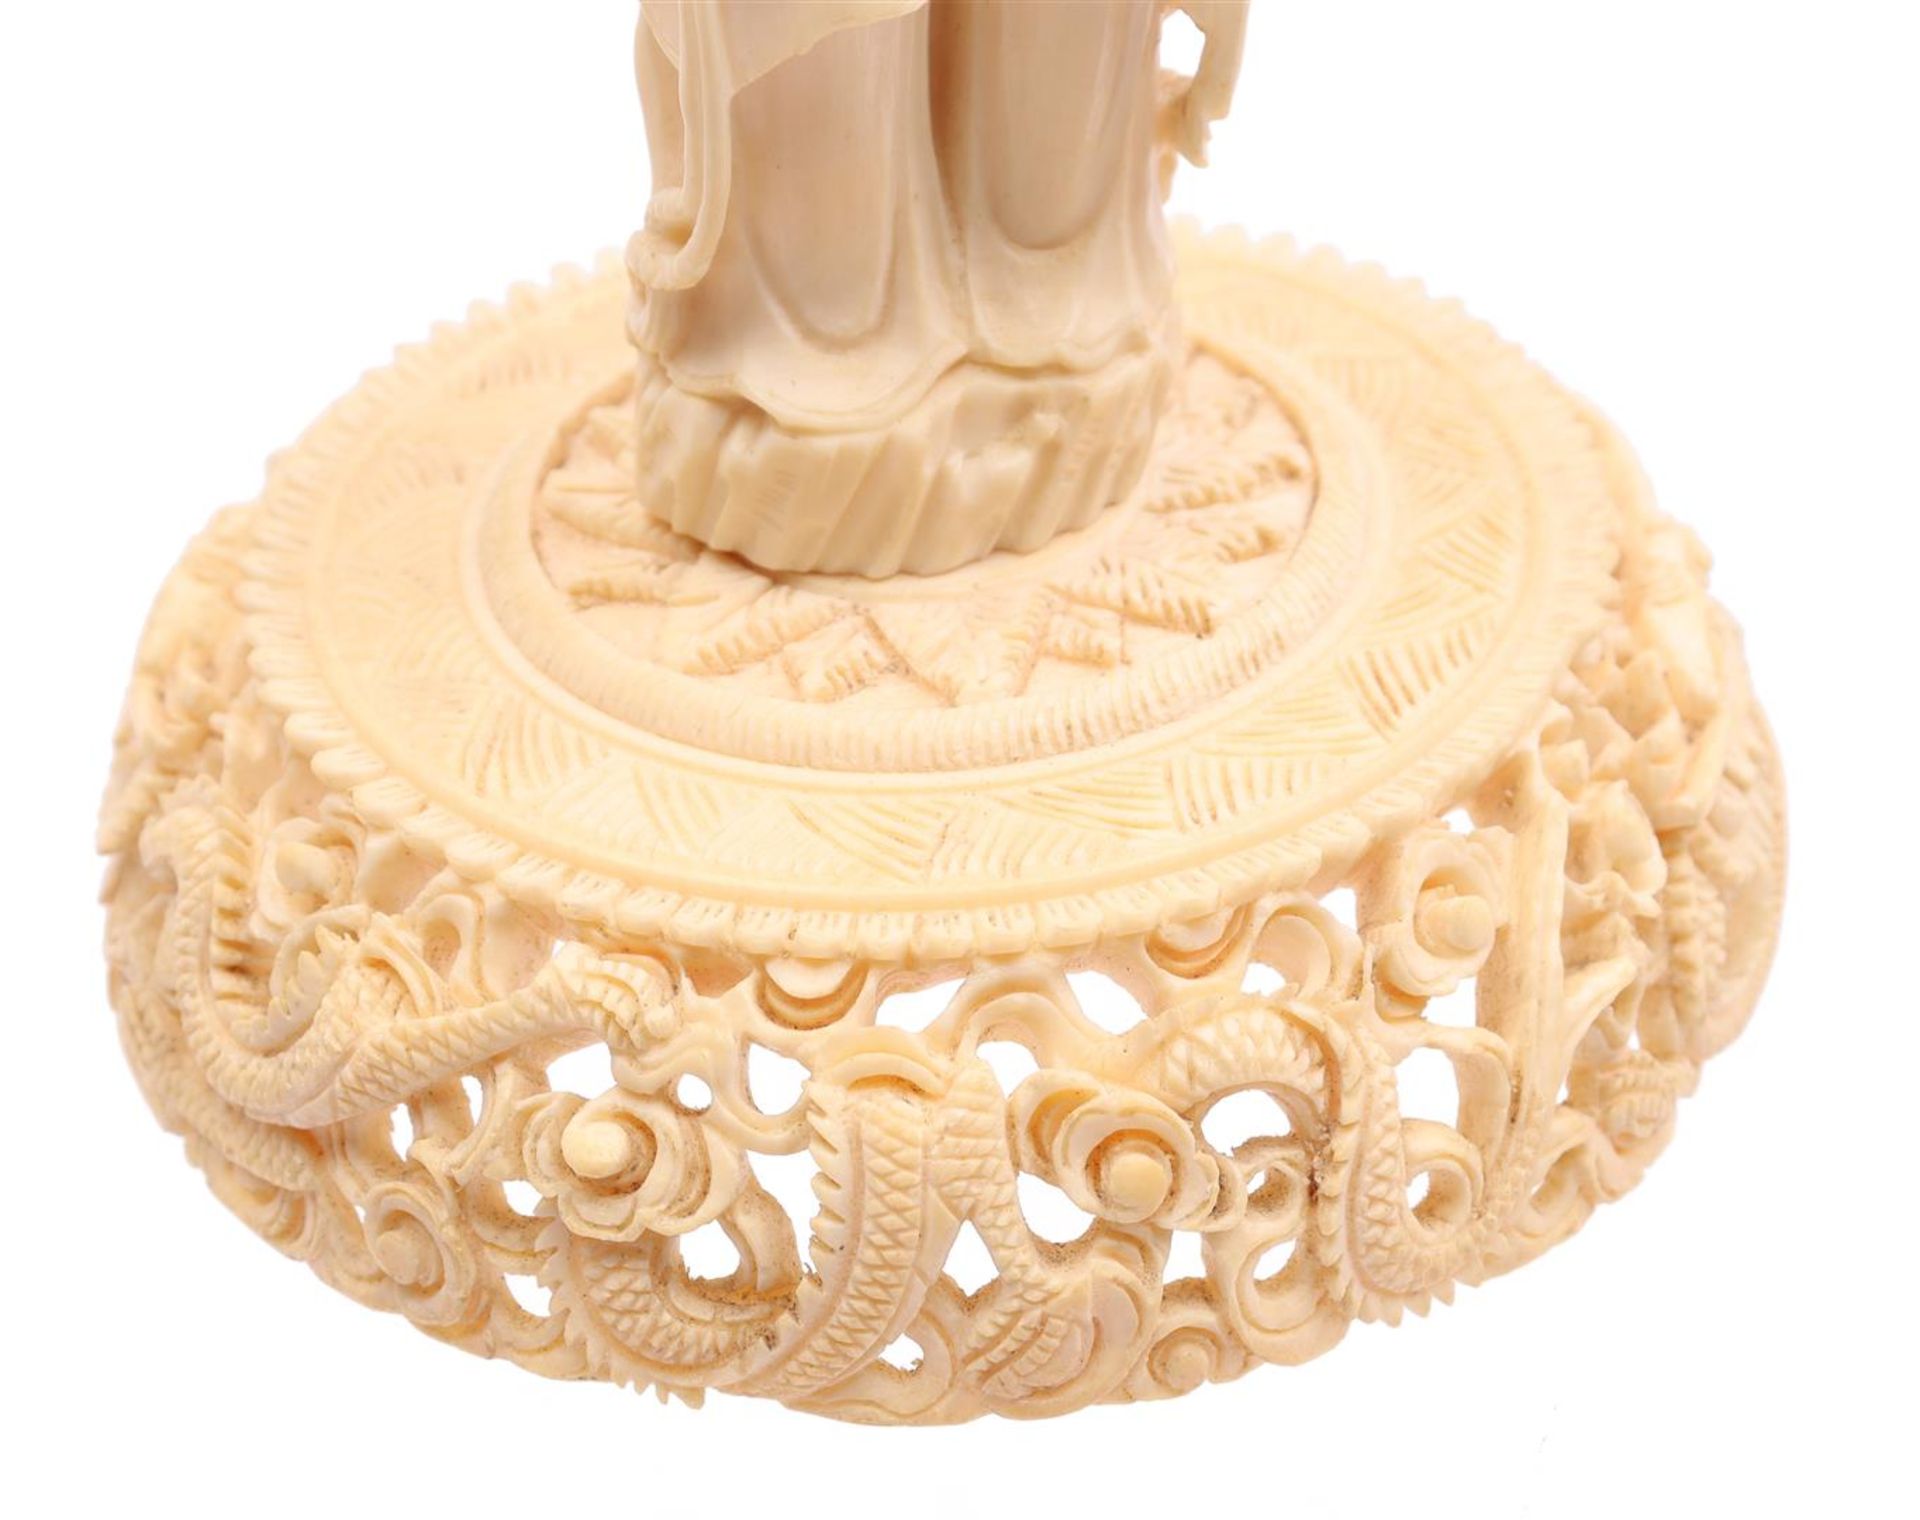 Richly carved ivory ball - Image 3 of 9